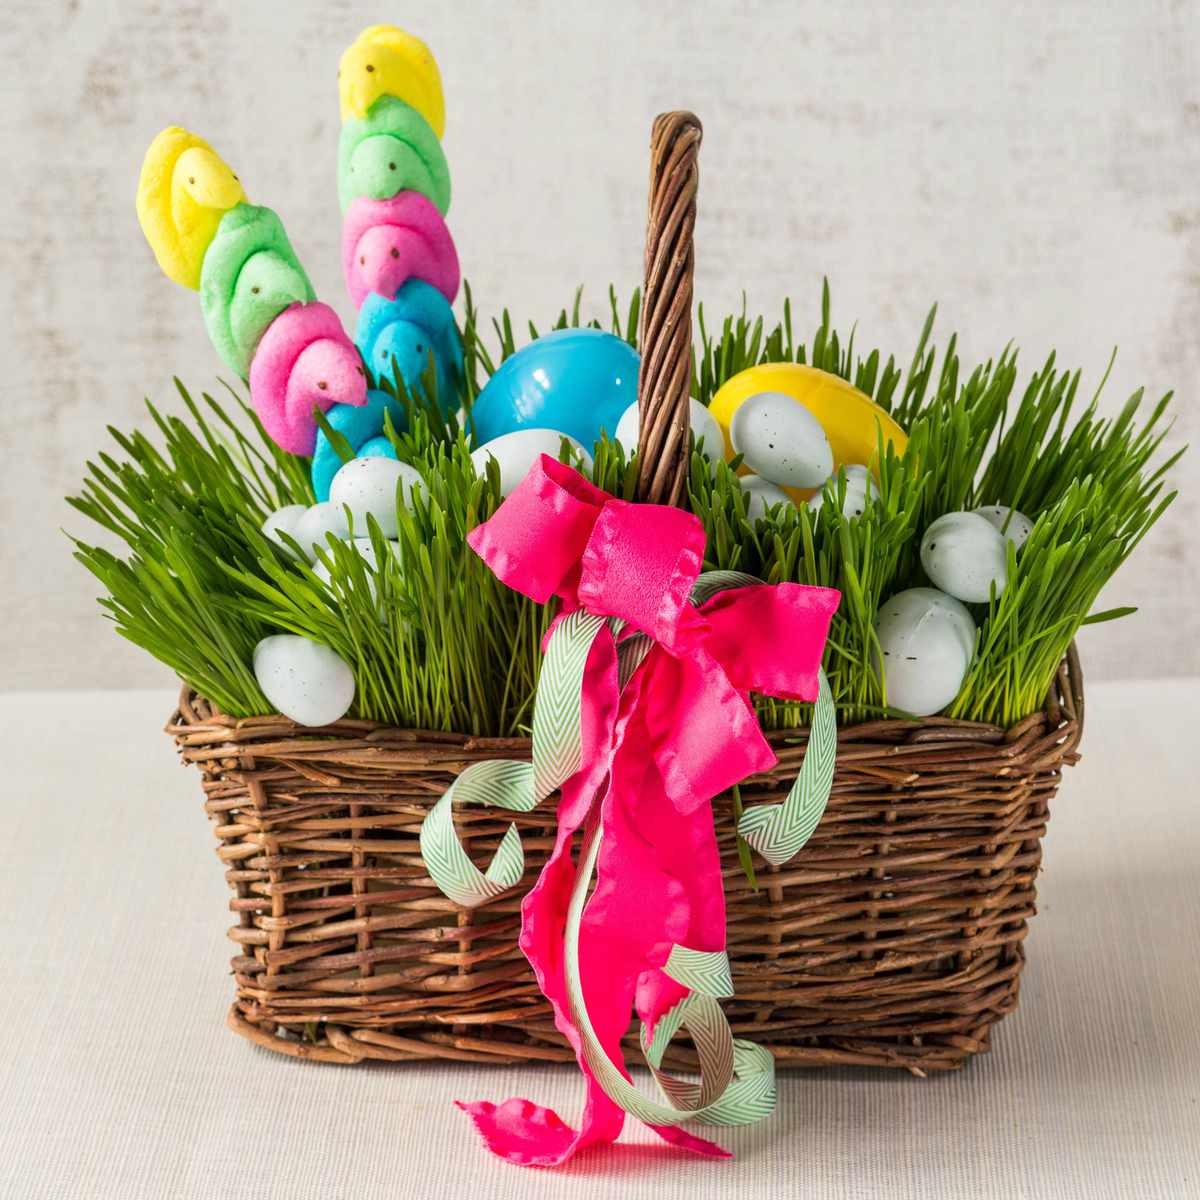 2 Bags EASTER Basket Grass Egg Packing ~You Choose Color 9 colors to choose from 